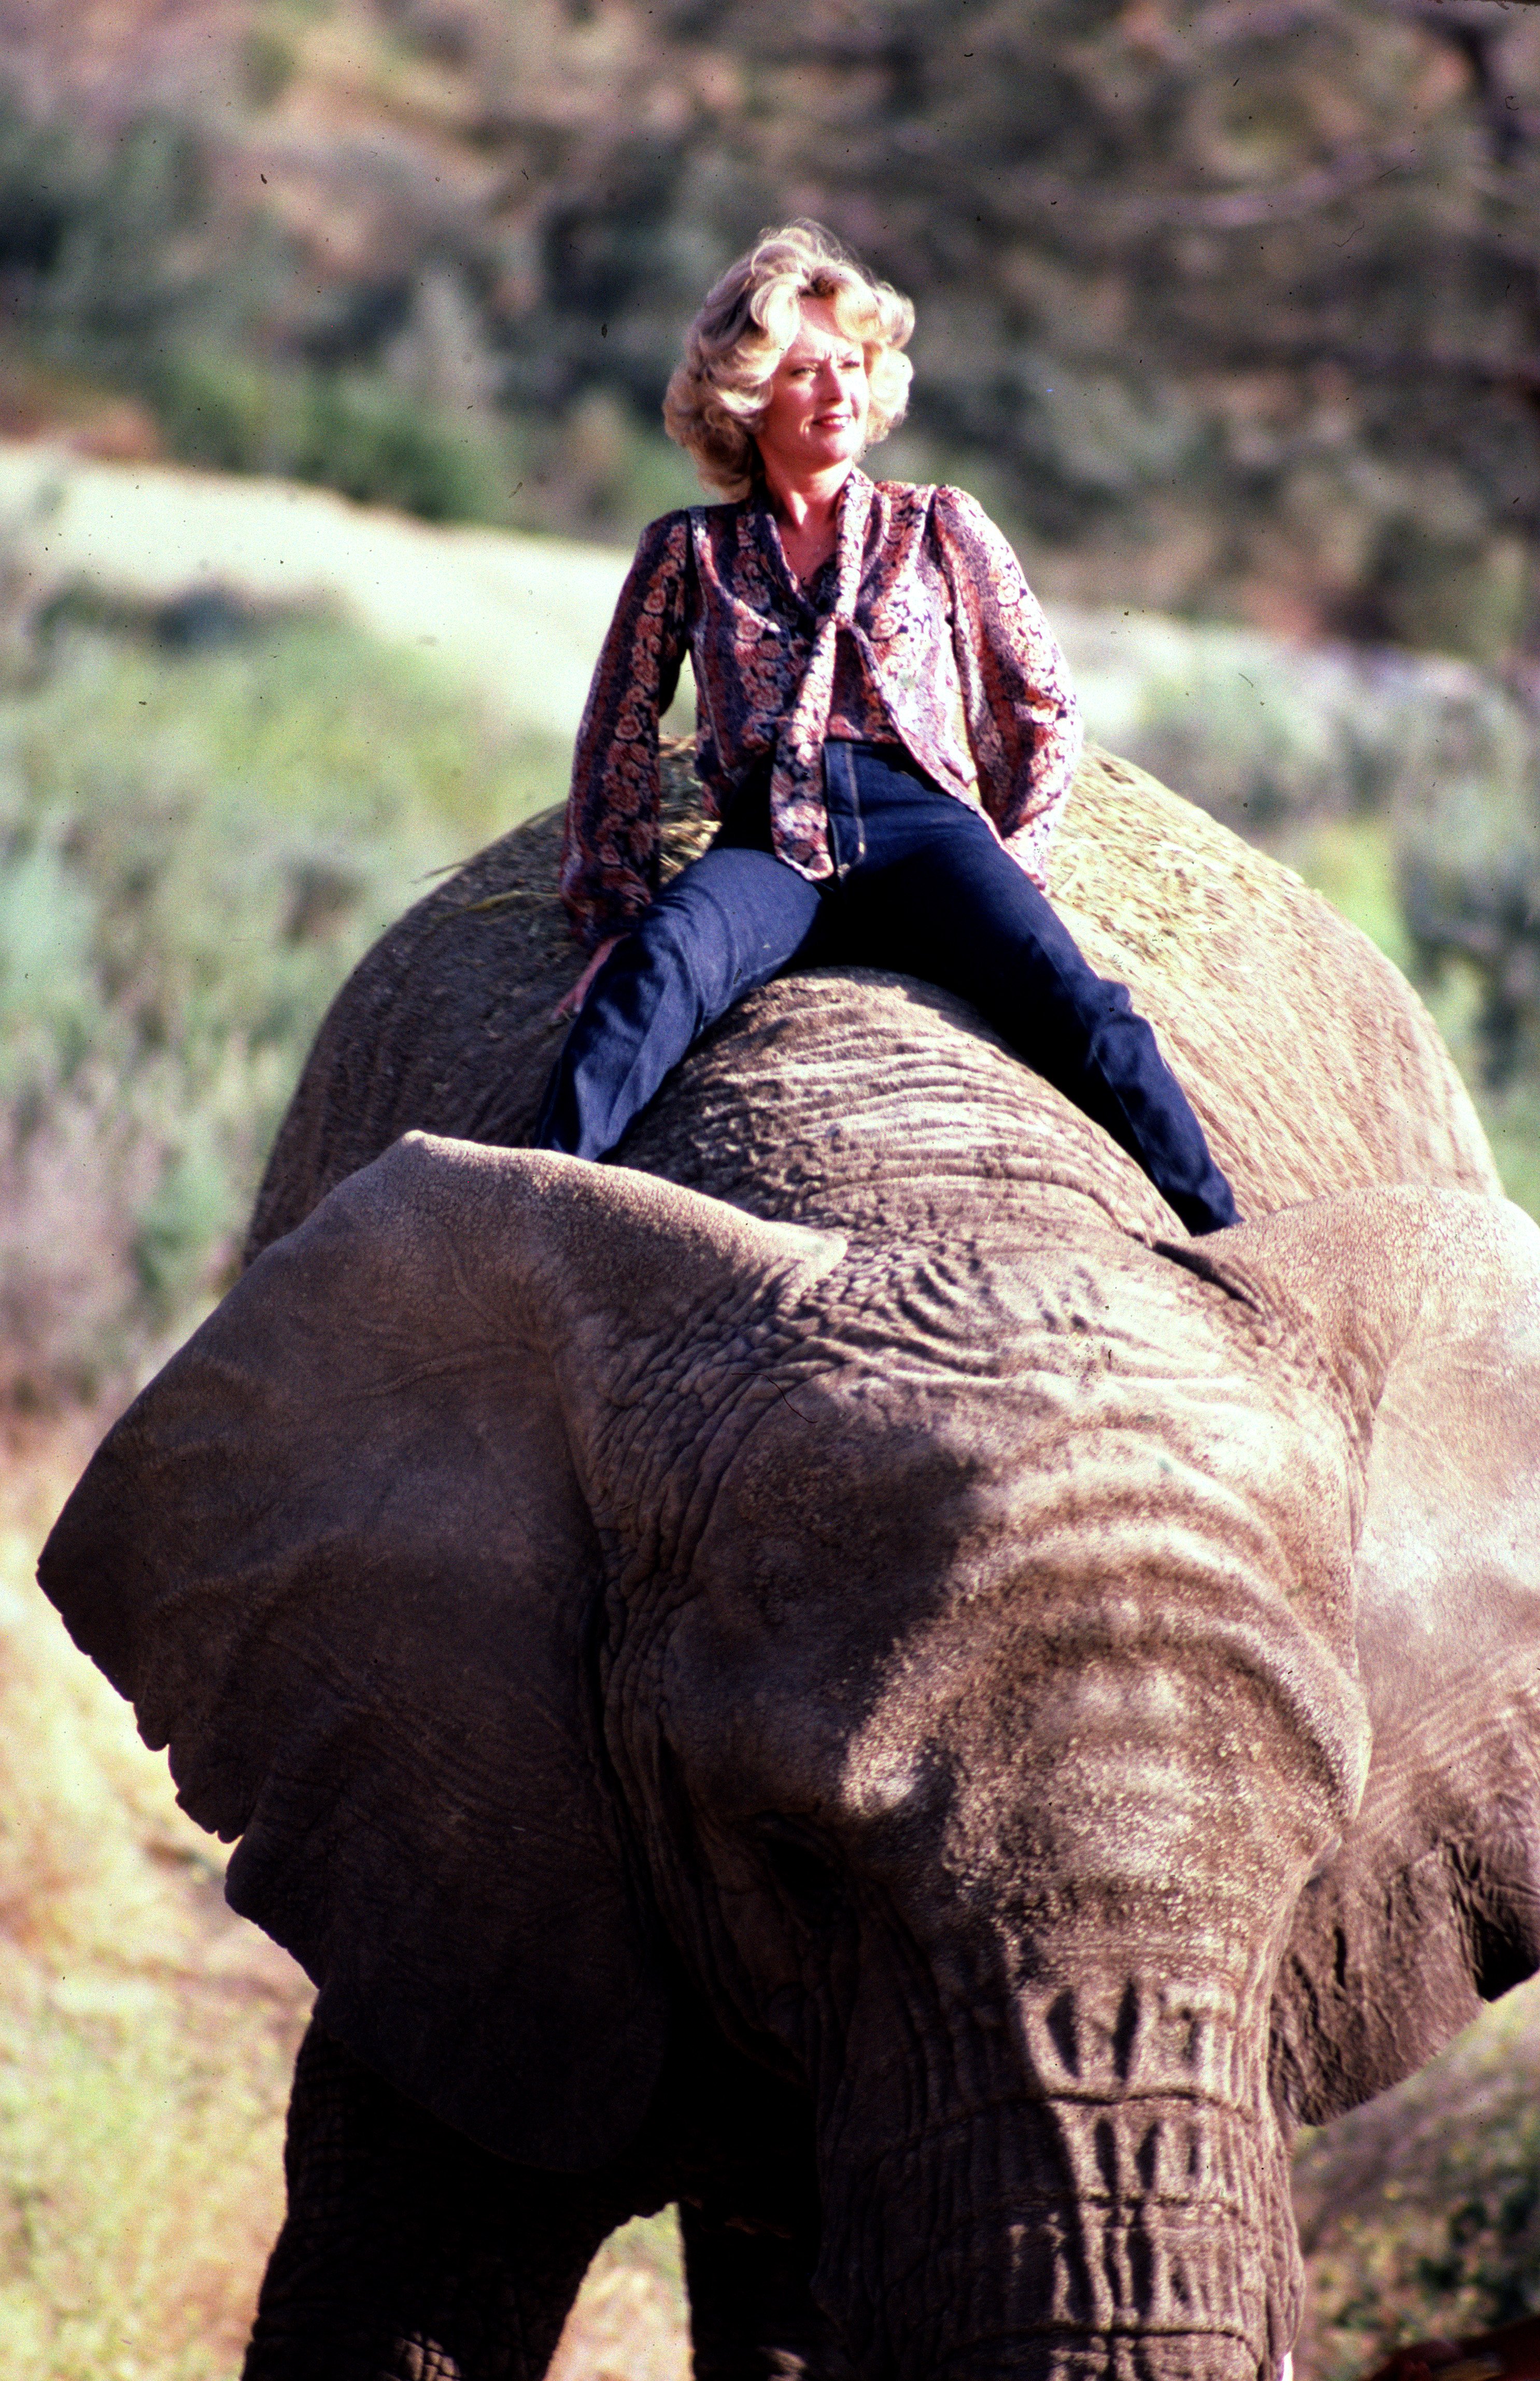 Actress Tippi Hedren, mother of Melanie Griffiths, star of the Alfred Hitchcock horror film The Birds sits astride an Elephant at her Saugus Animal reserve November 17, 1983 at a table in Saugus, California. | Source: Getty Images